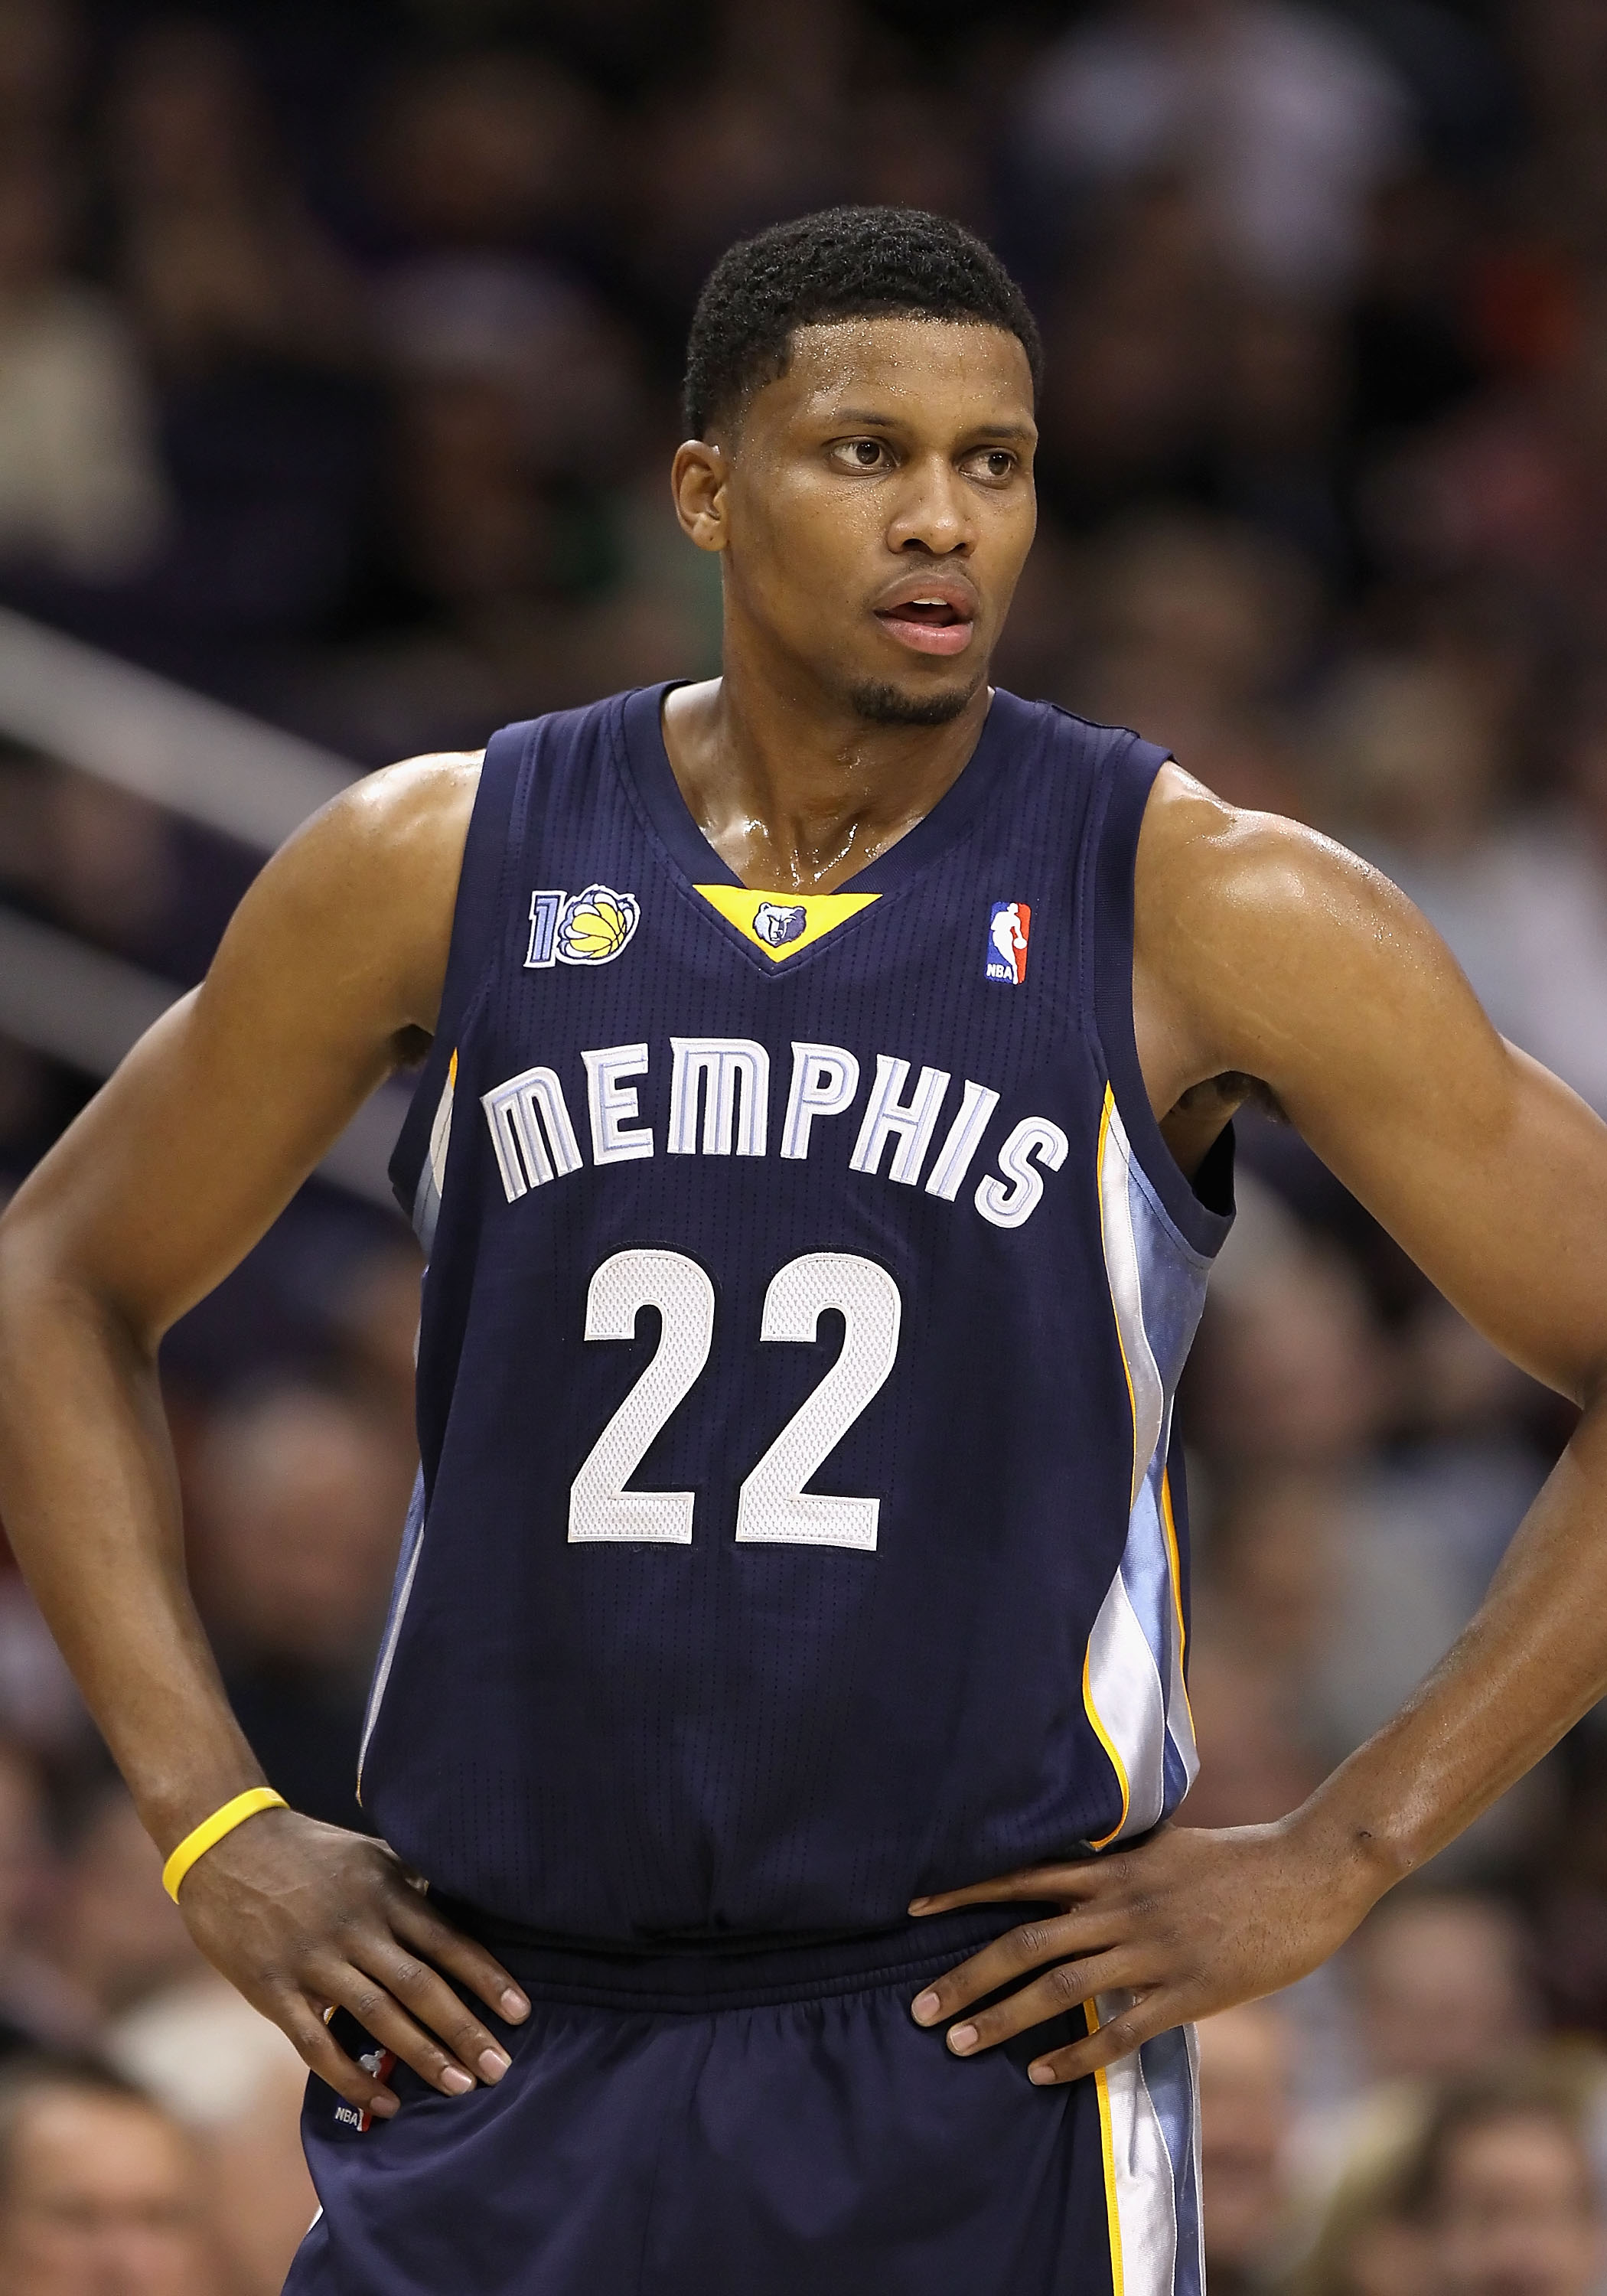 PHOENIX - DECEMBER 08:  Rudy Gay #22 of the Memphis Grizzlies during the NBA game against the Phoenix Suns  at US Airways Center on December 8, 2010 in Phoenix, Arizona. NOTE TO USER: User expressly acknowledges and agrees that, by downloading and or usin